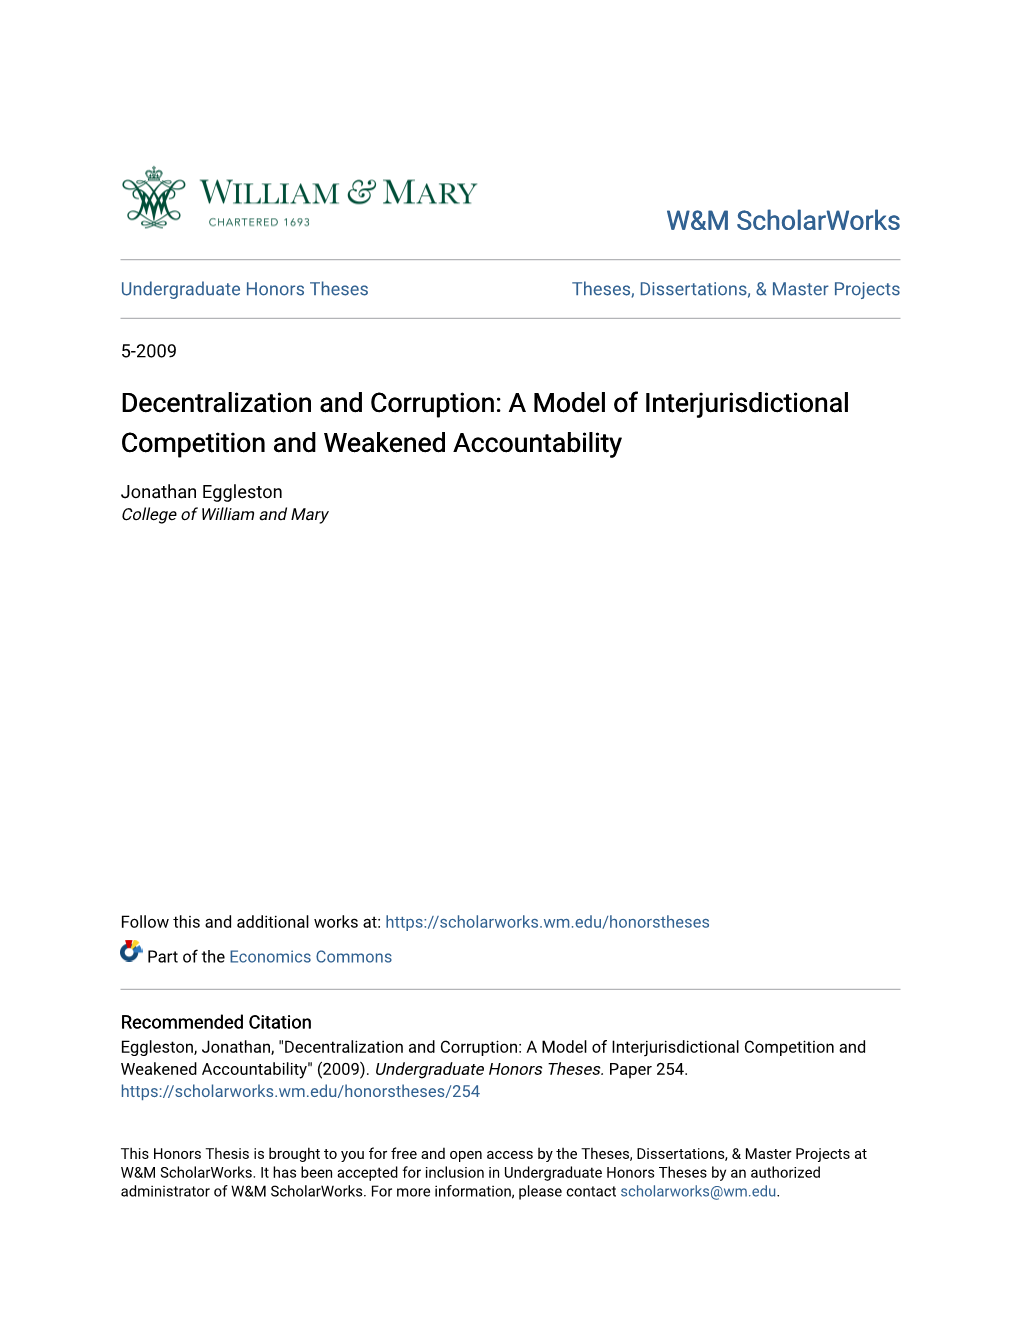 Decentralization and Corruption: a Model of Interjurisdictional Competition and Weakened Accountability